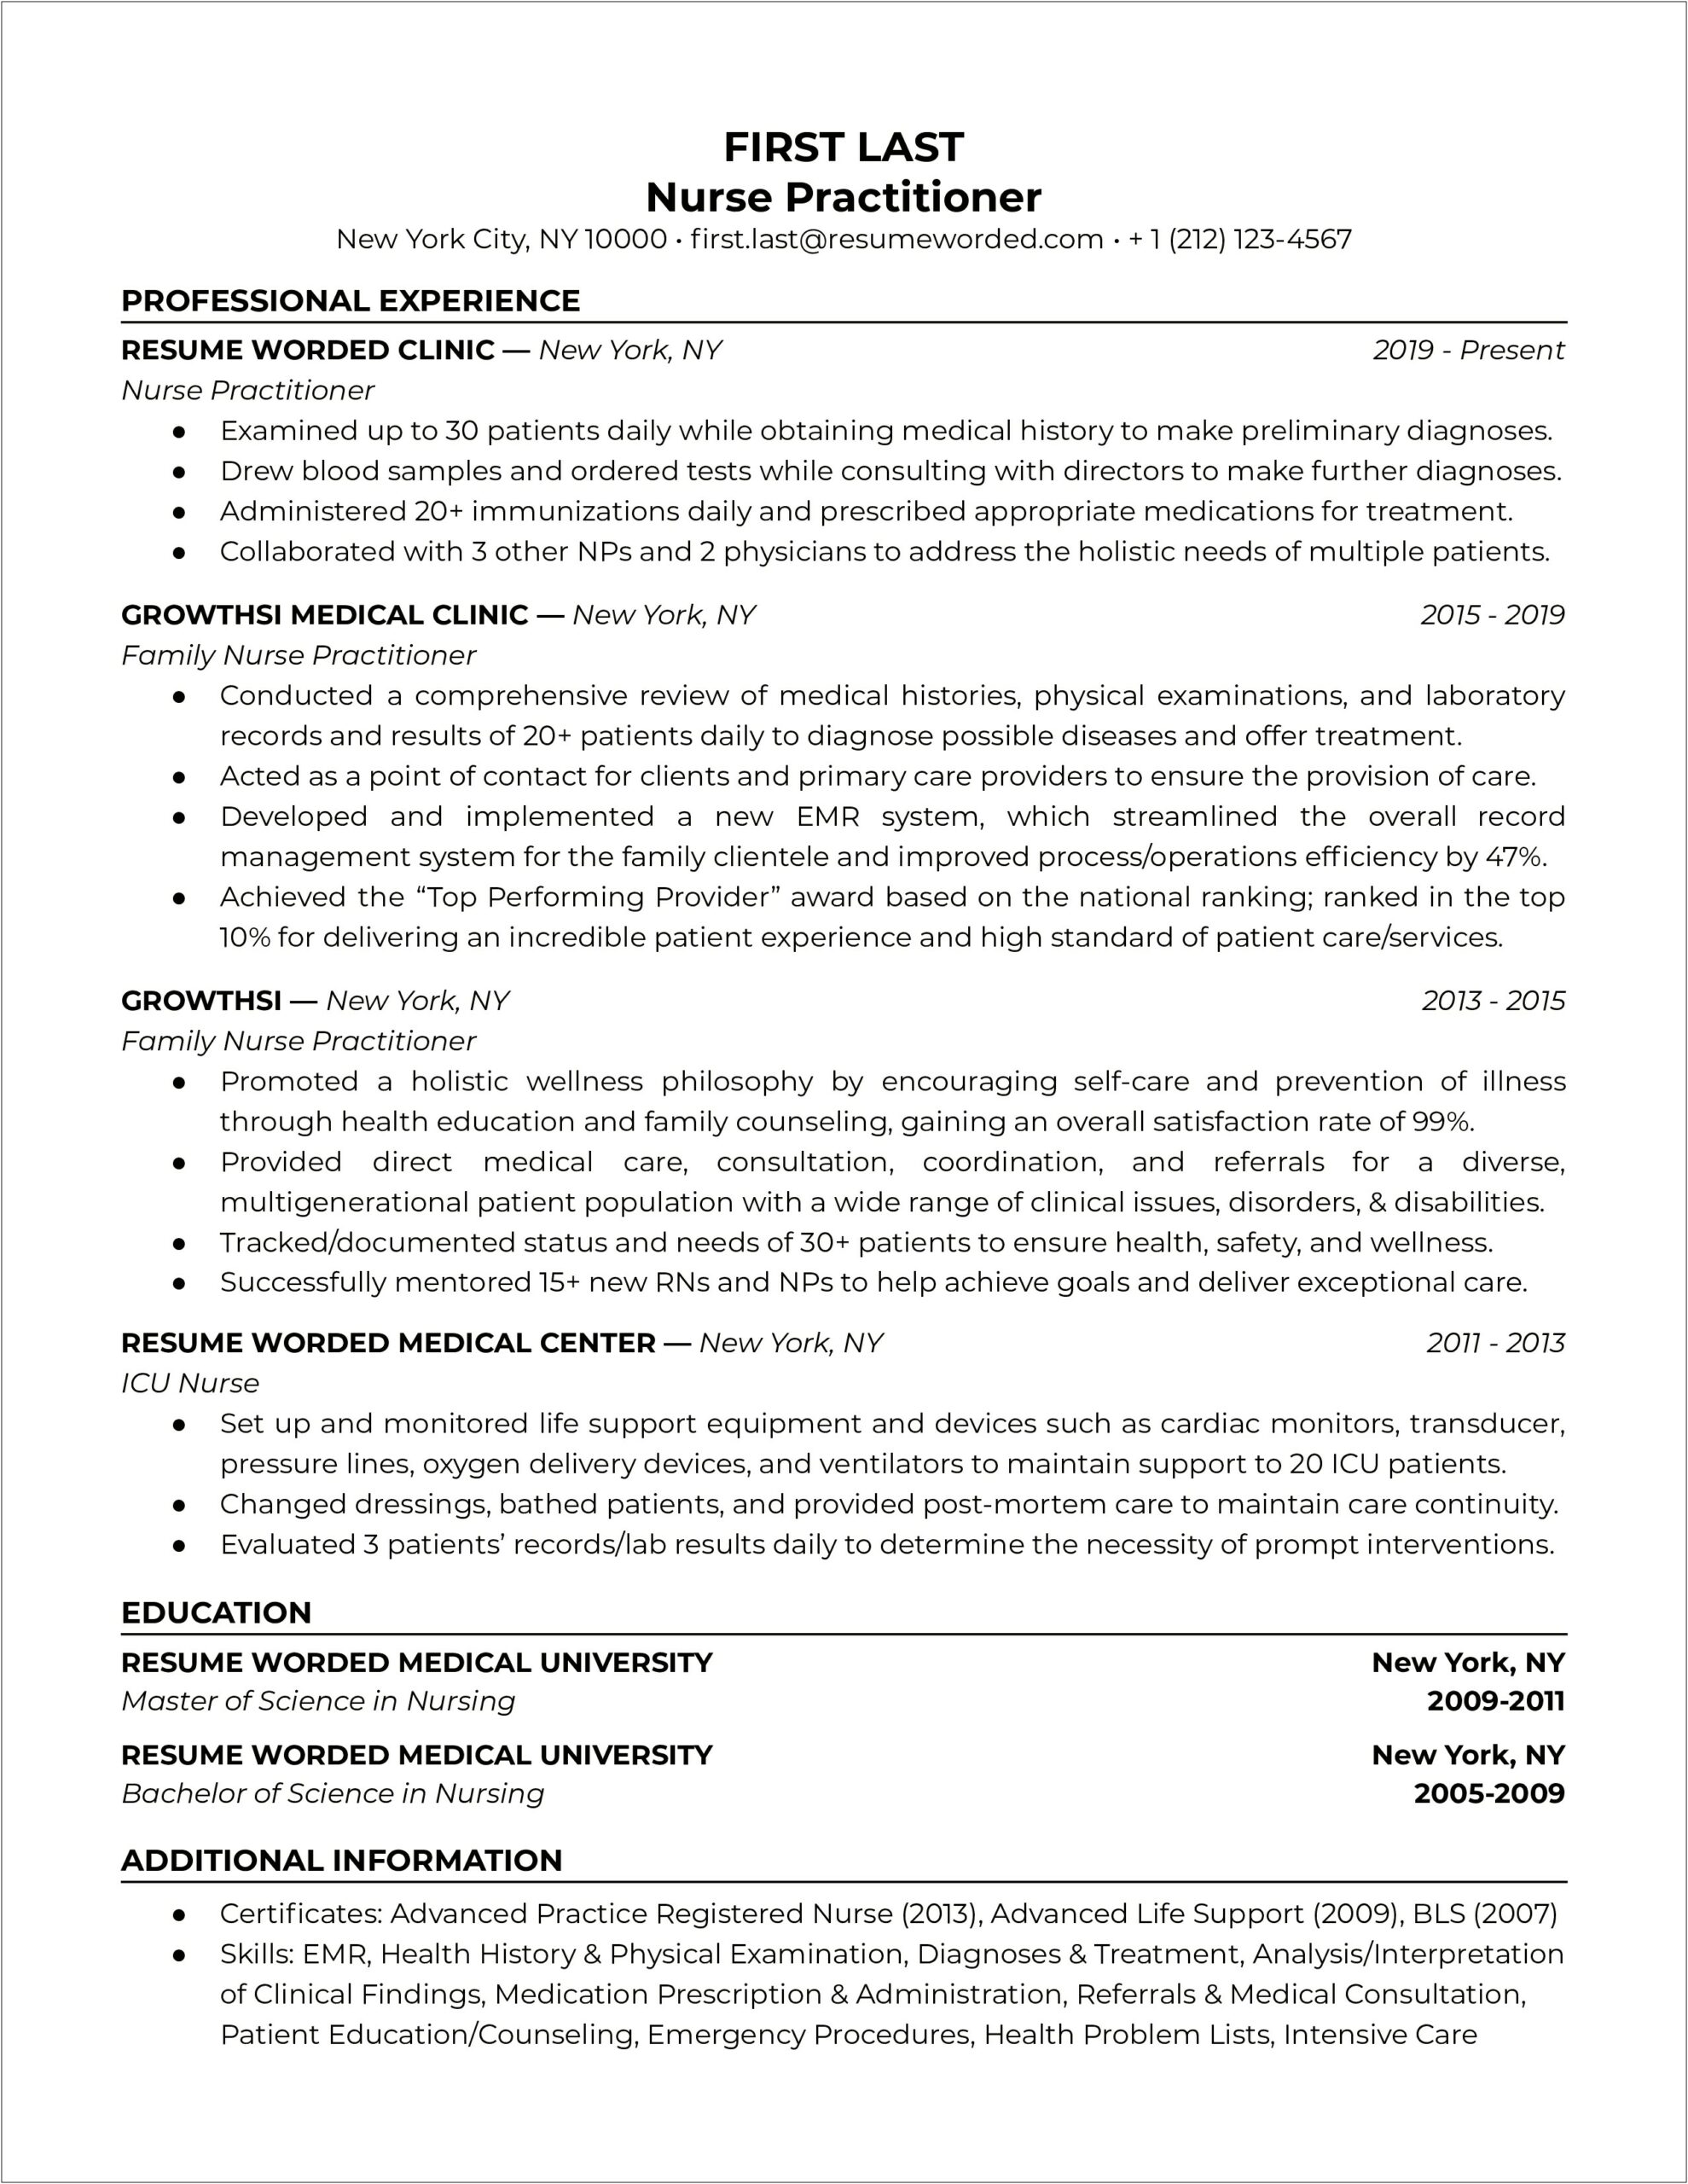 Resume Summary Qualifications Family Nurse Practitioner Student Examples